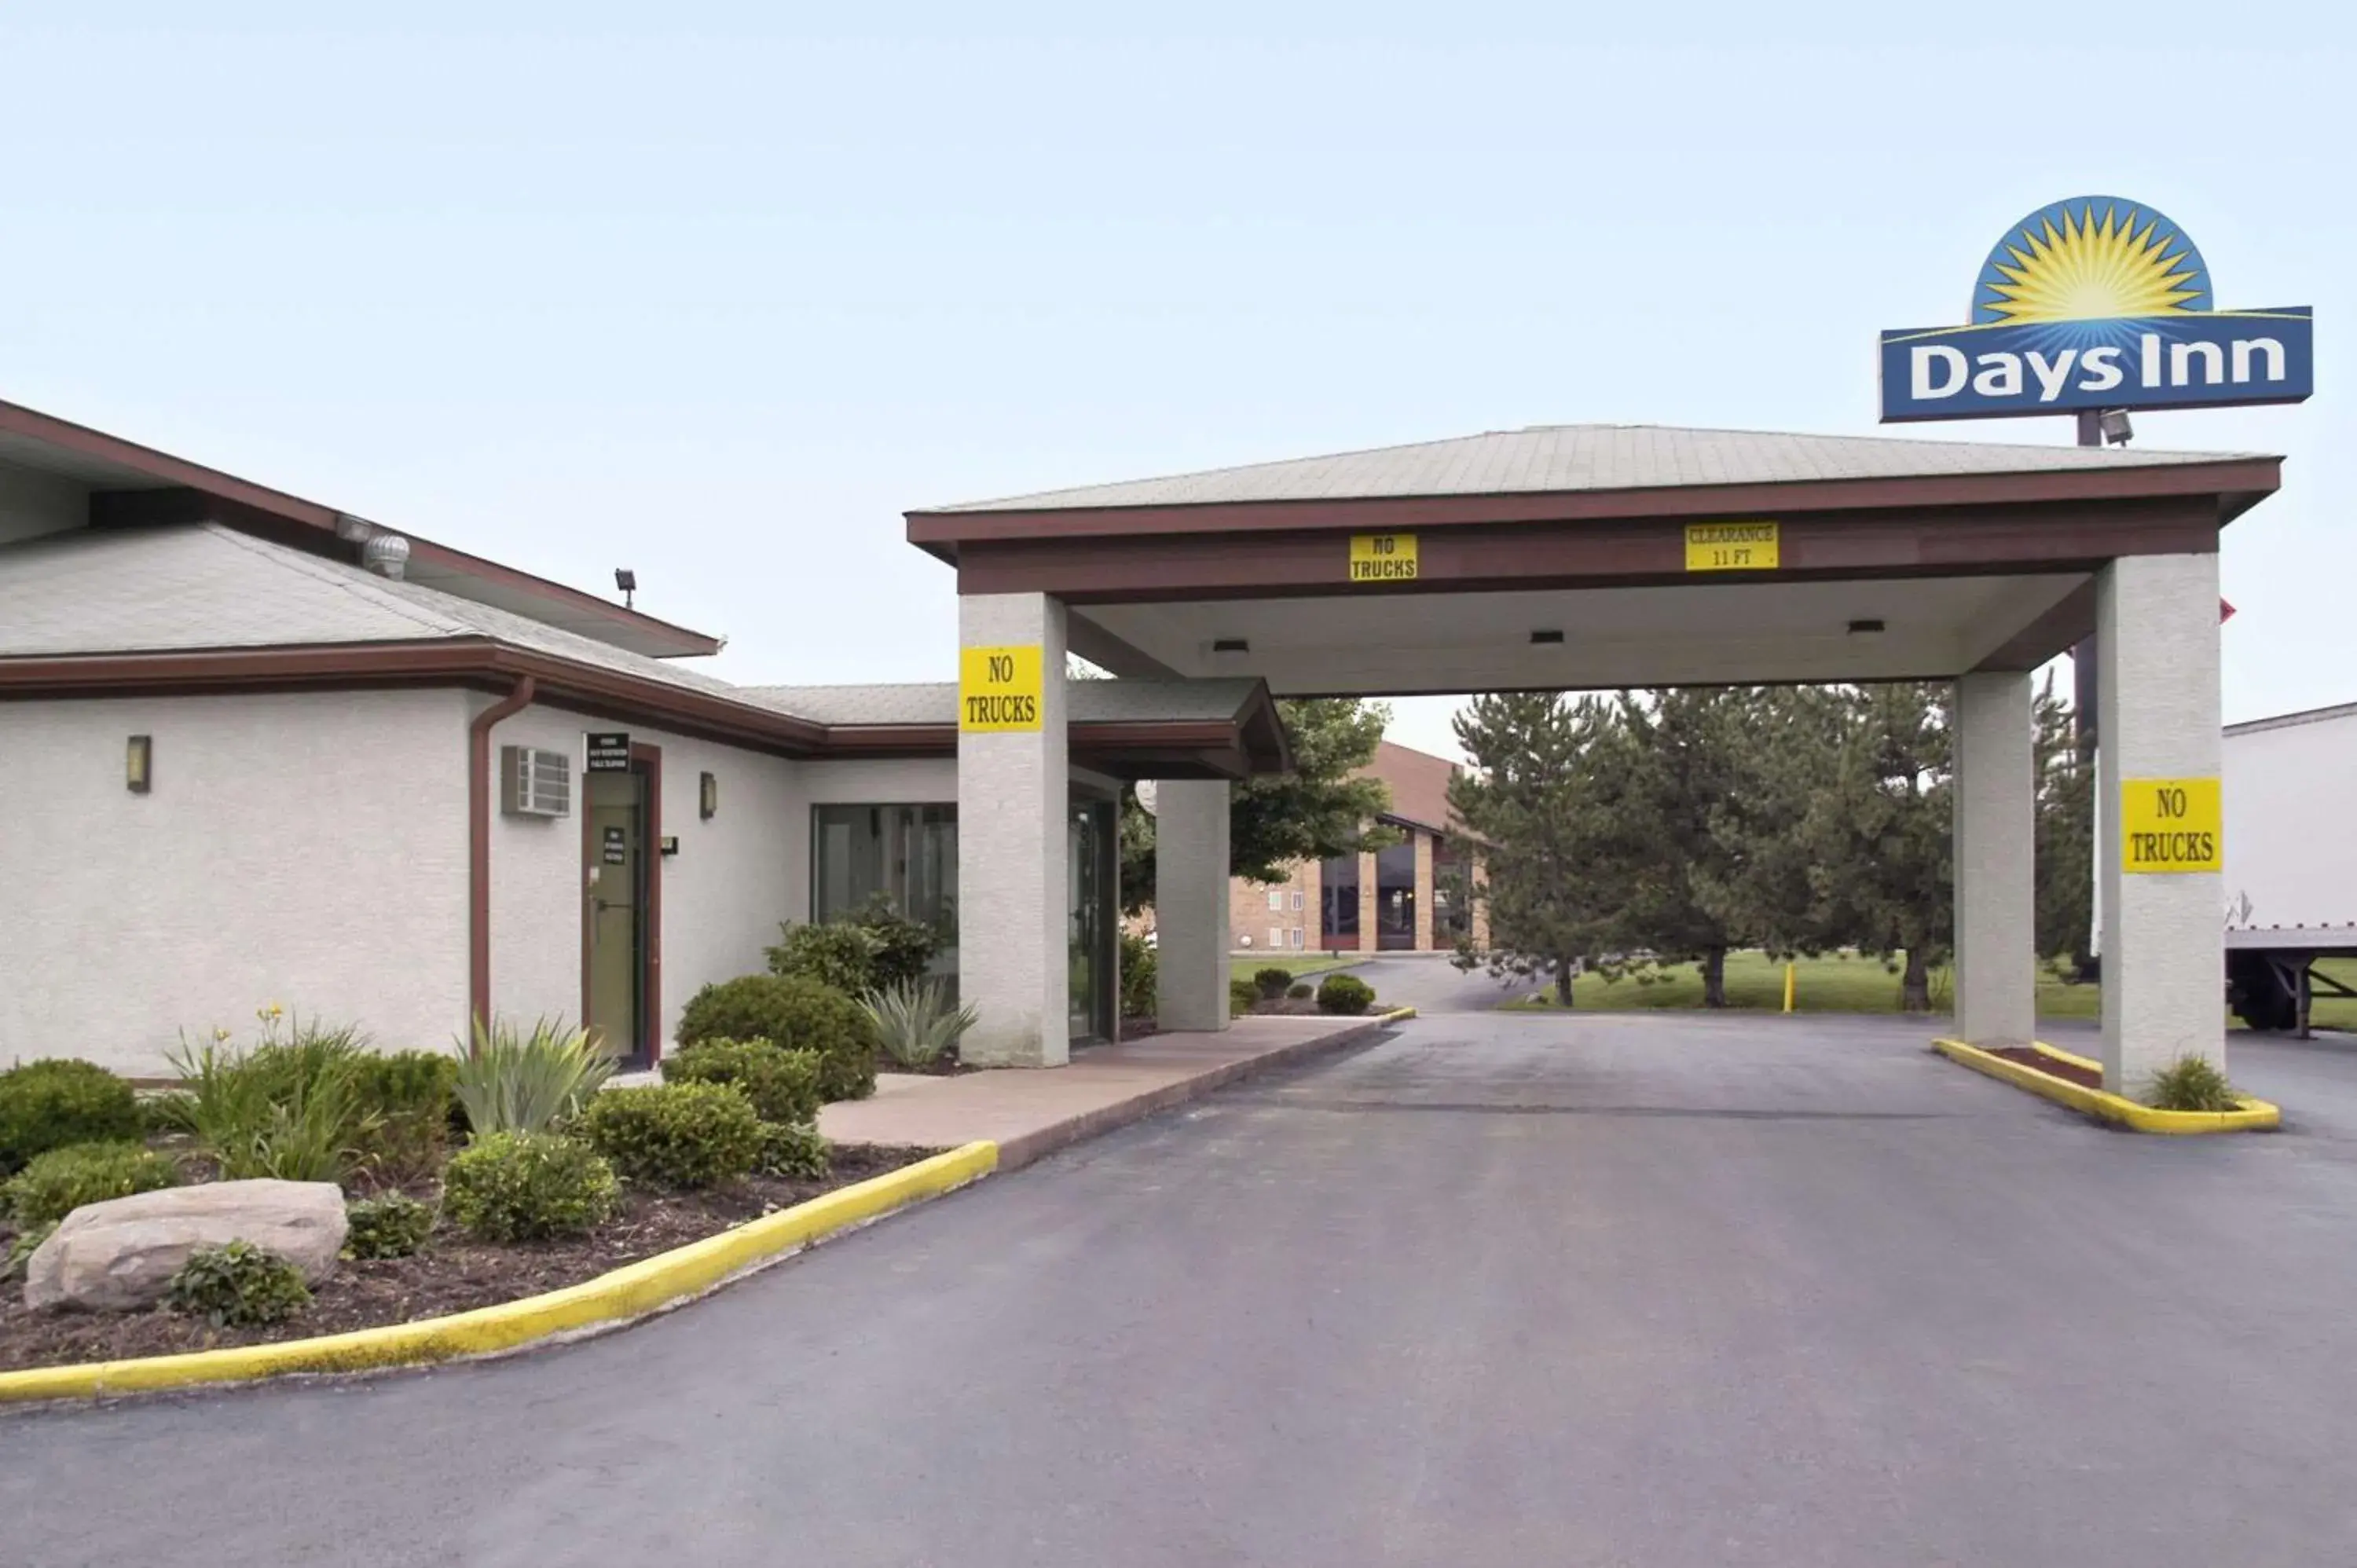 Property building in Days Inn by Wyndham Plainfield